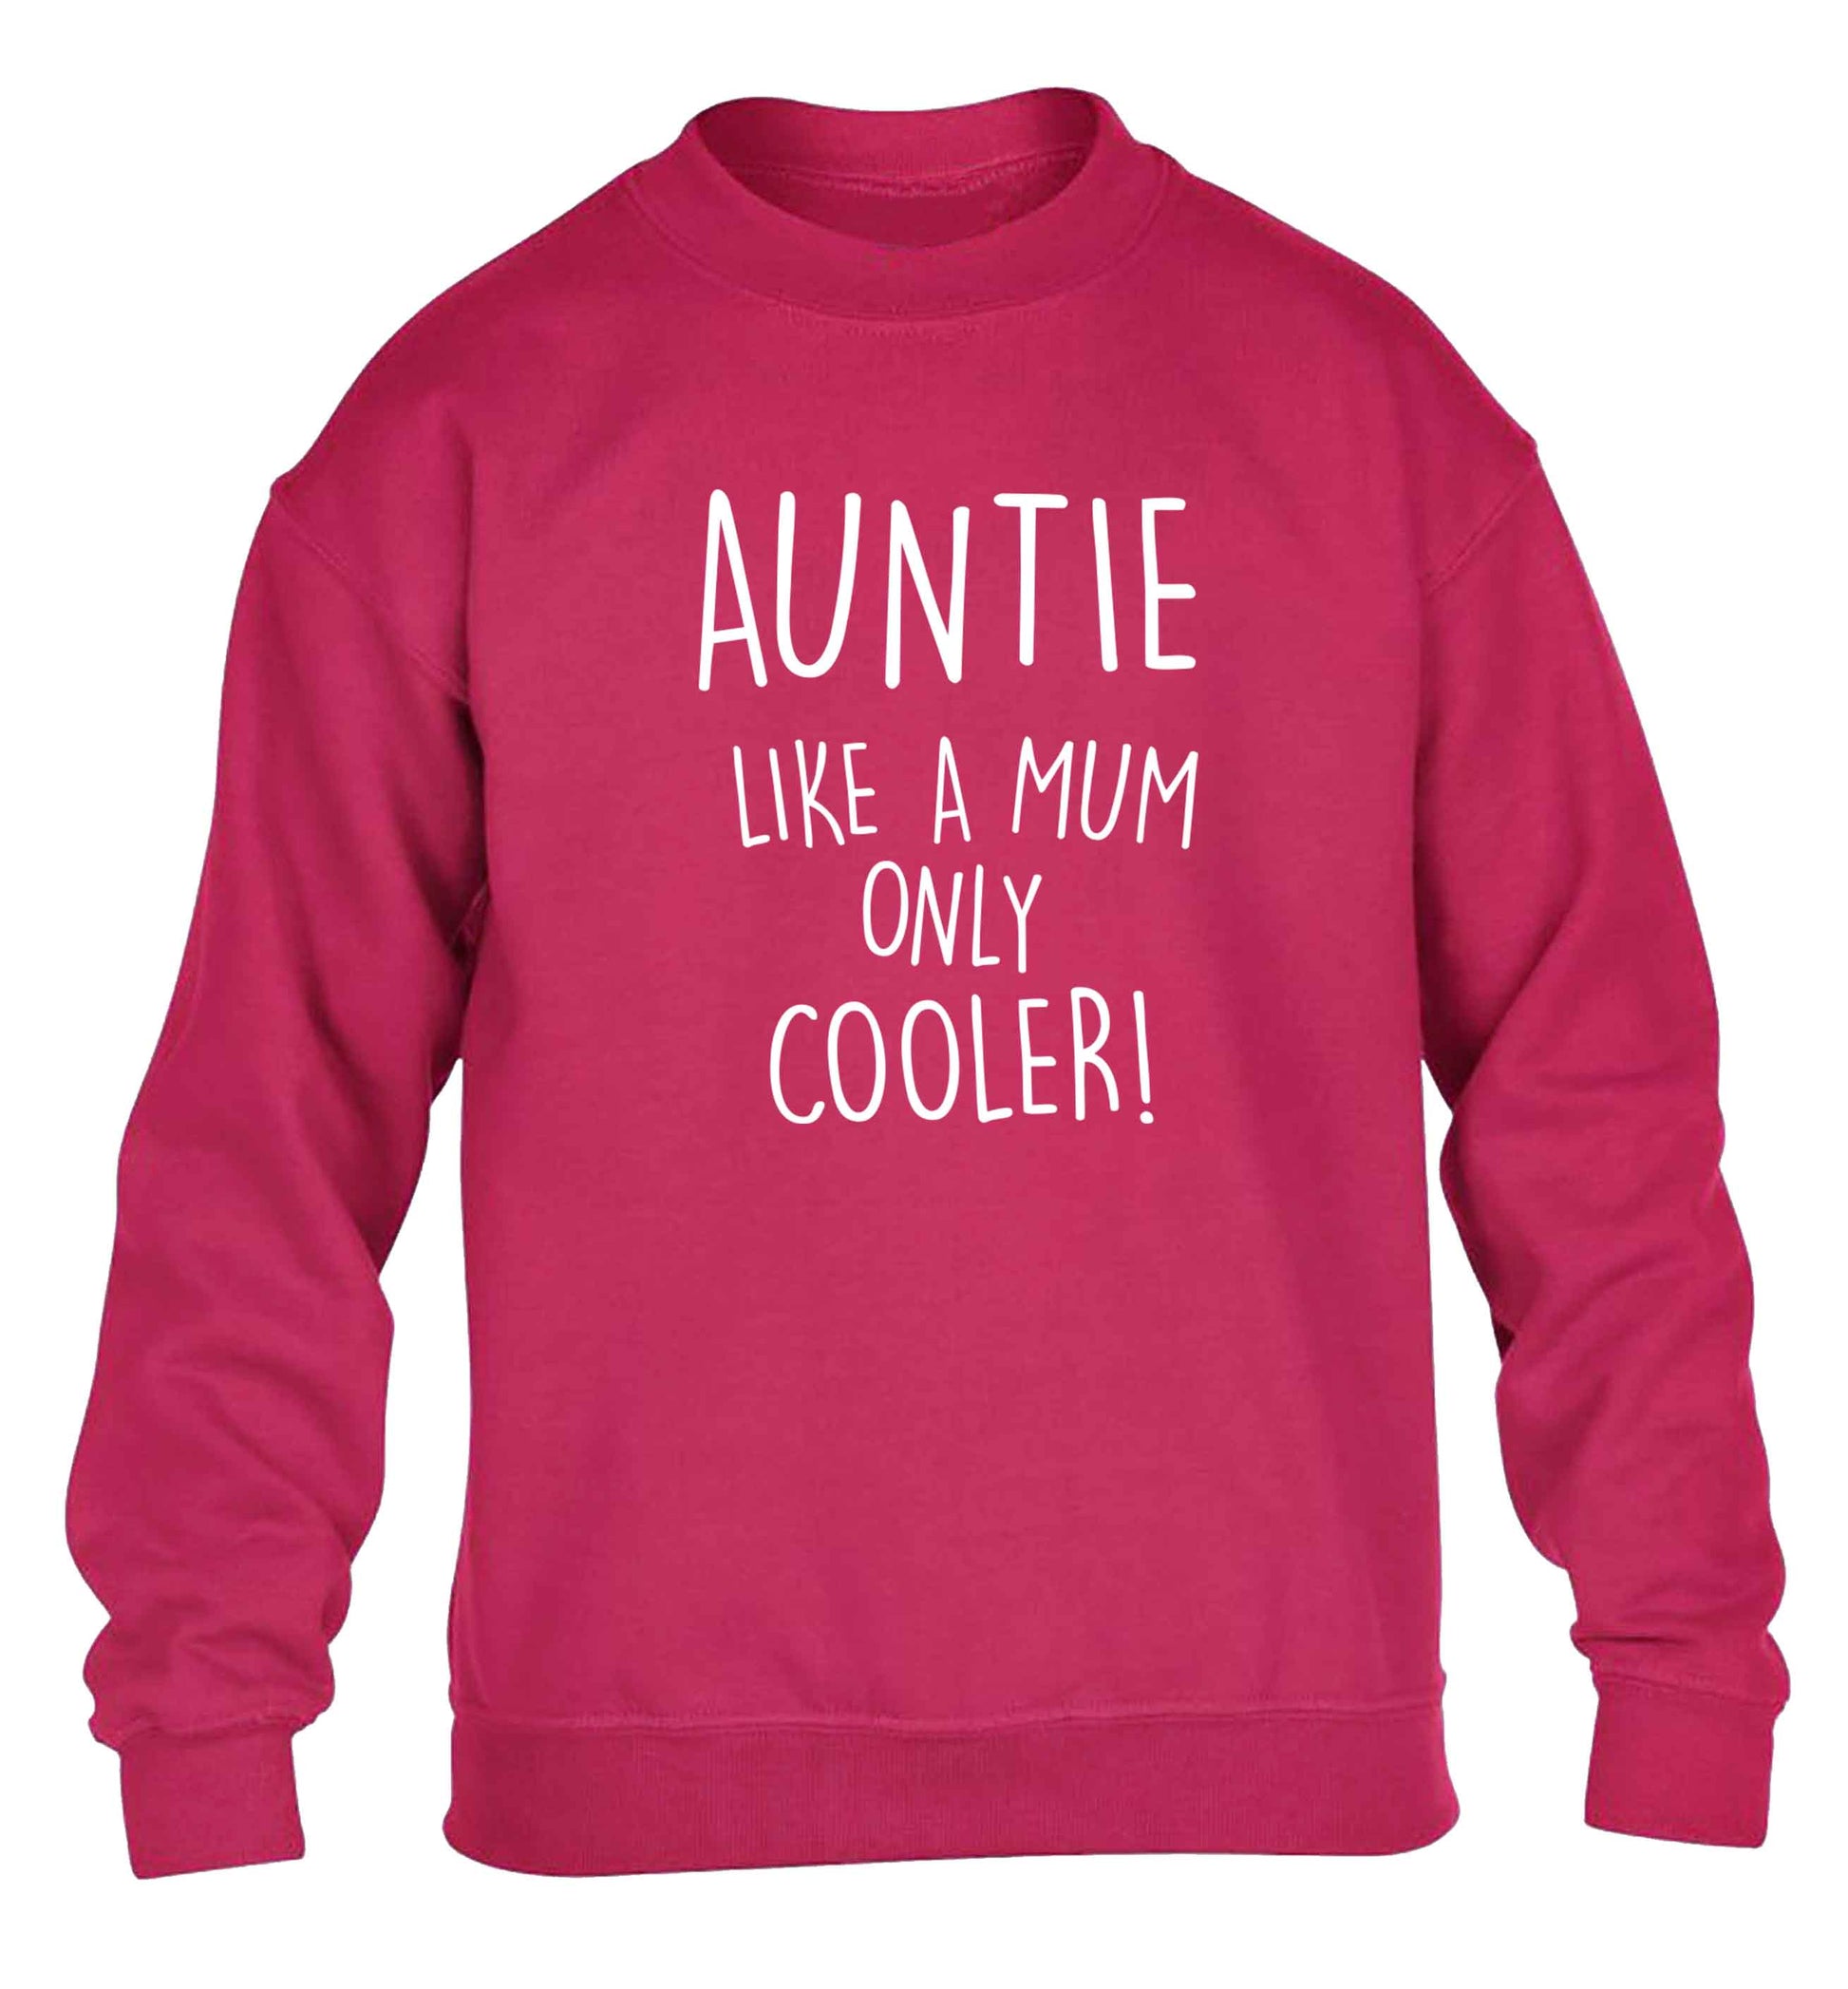 Auntie like a mum only cooler children's pink sweater 12-13 Years